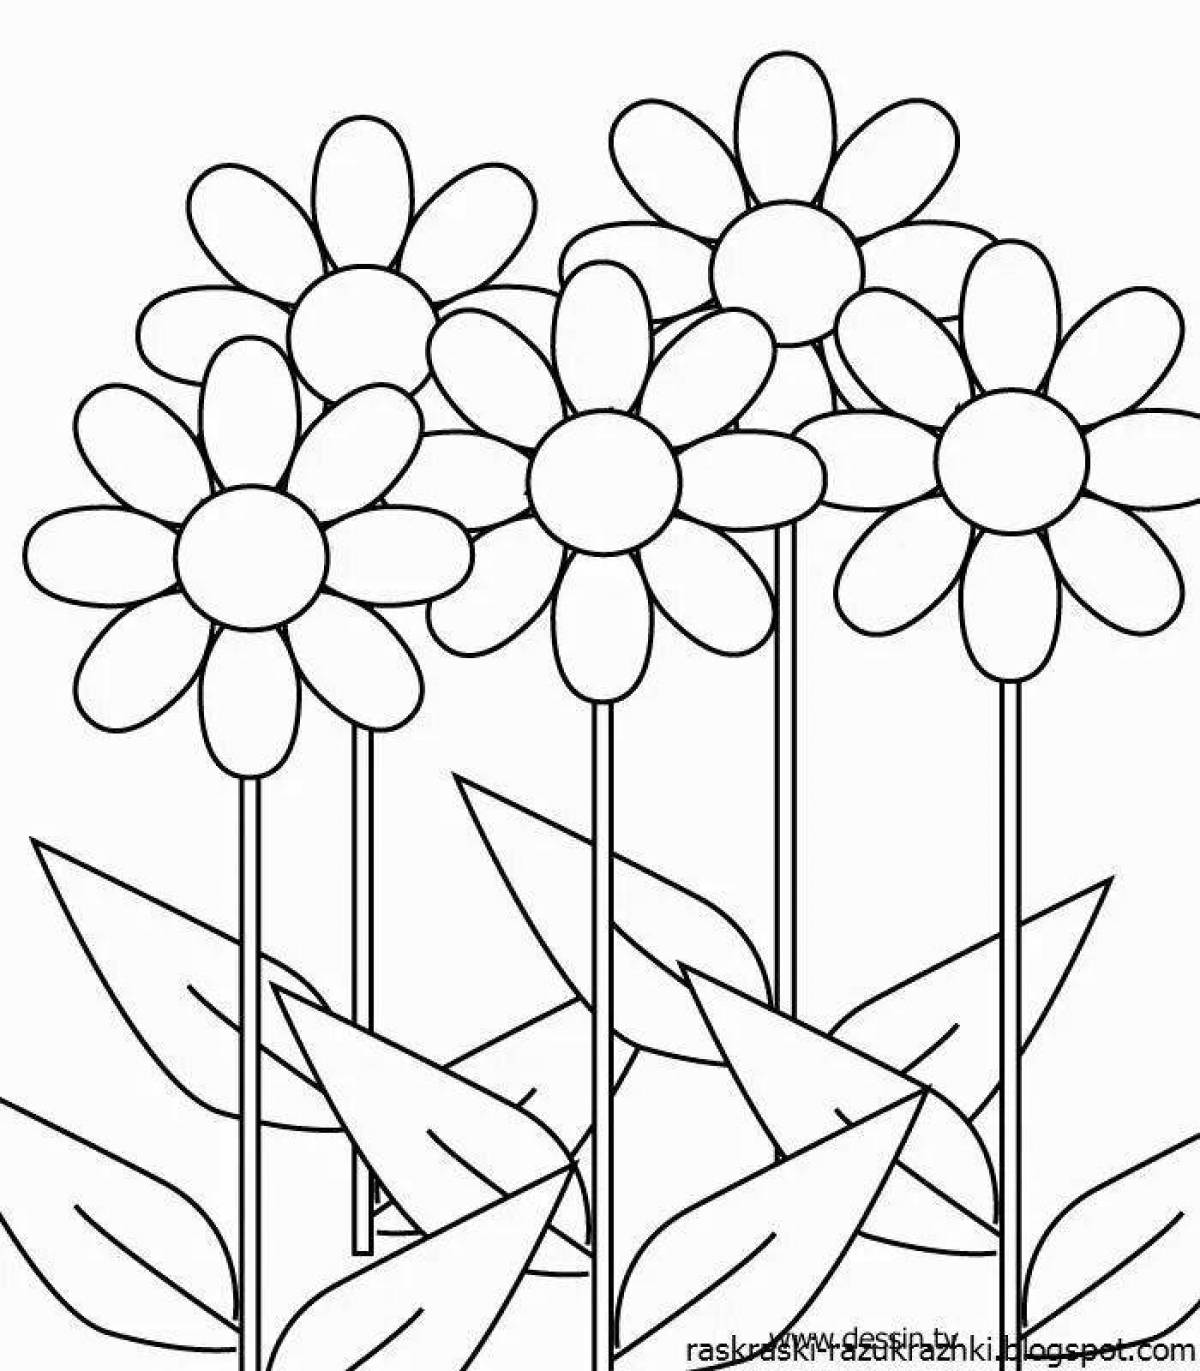 Life coloring of plants for children